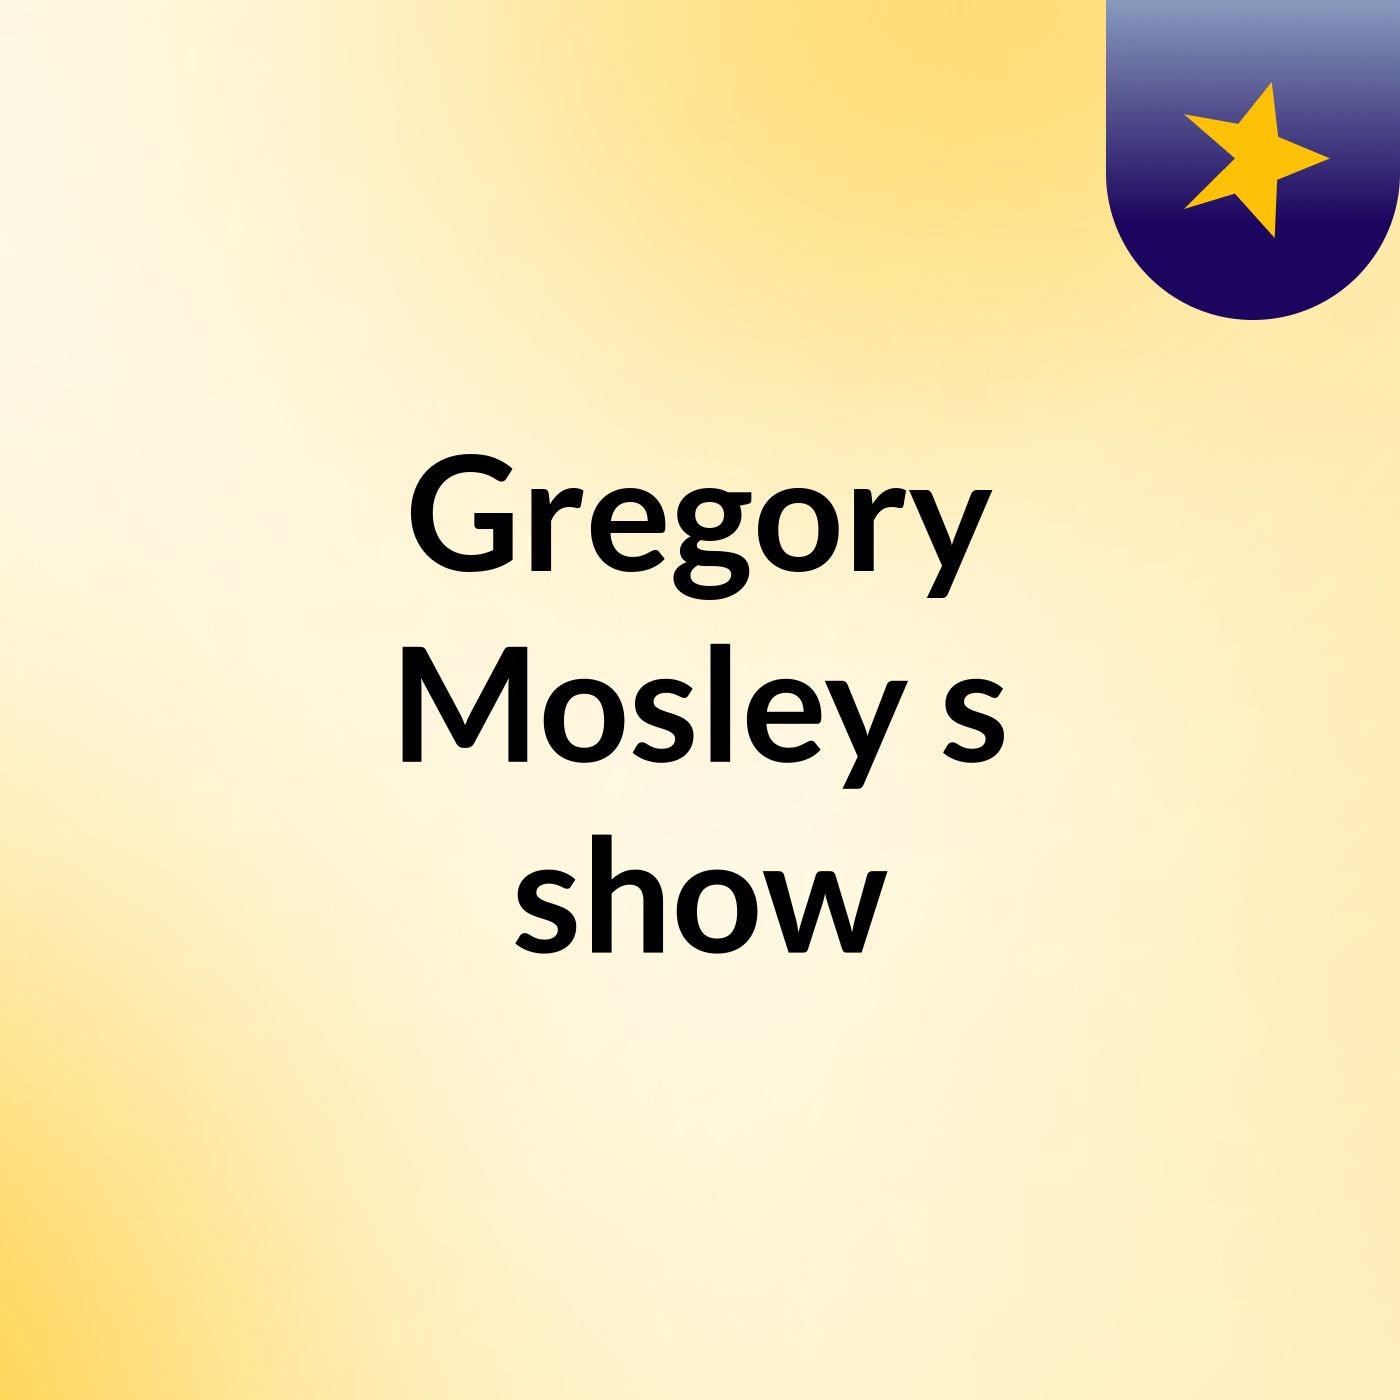 Gregory Mosley's show